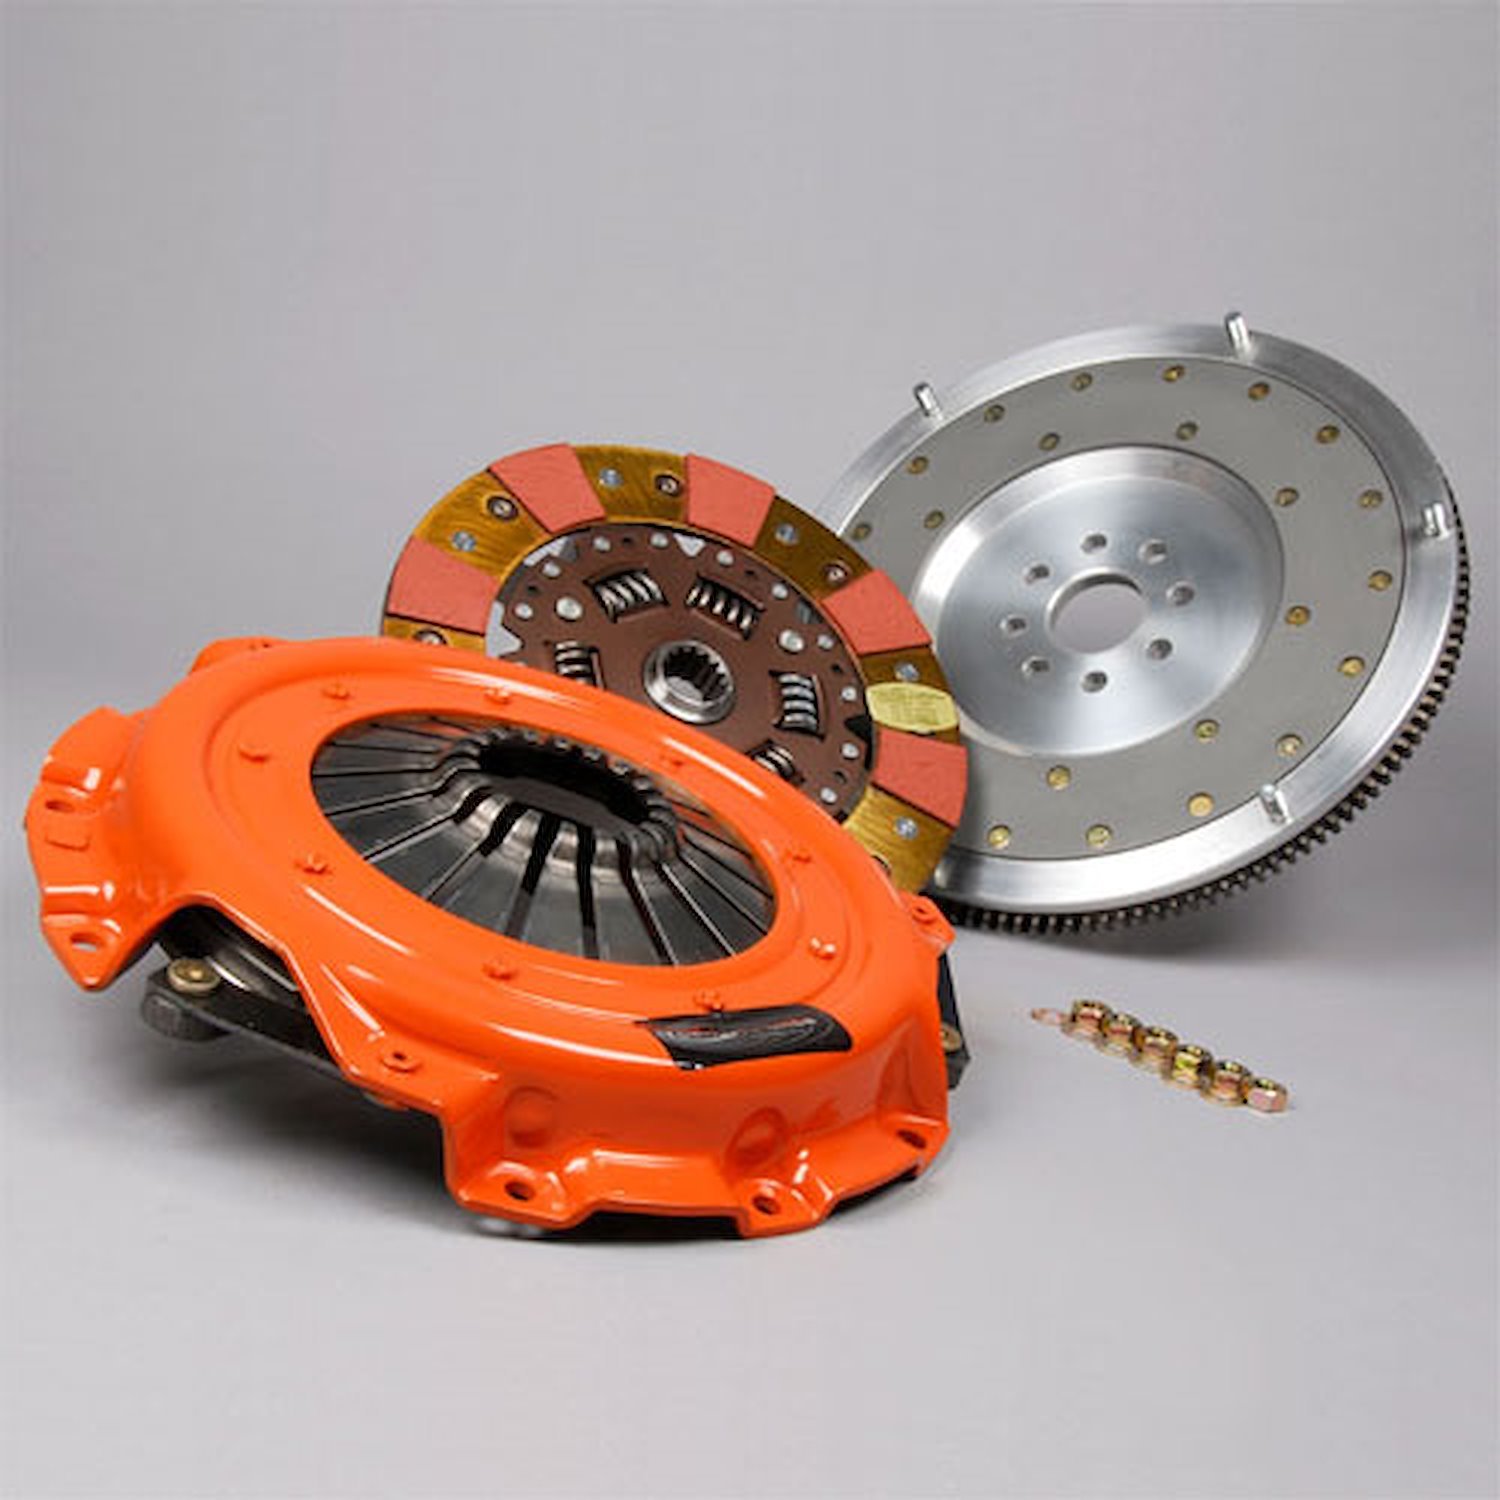 Dual Friction Clutch Includes Pressure Plate, Disc, & Flywheel